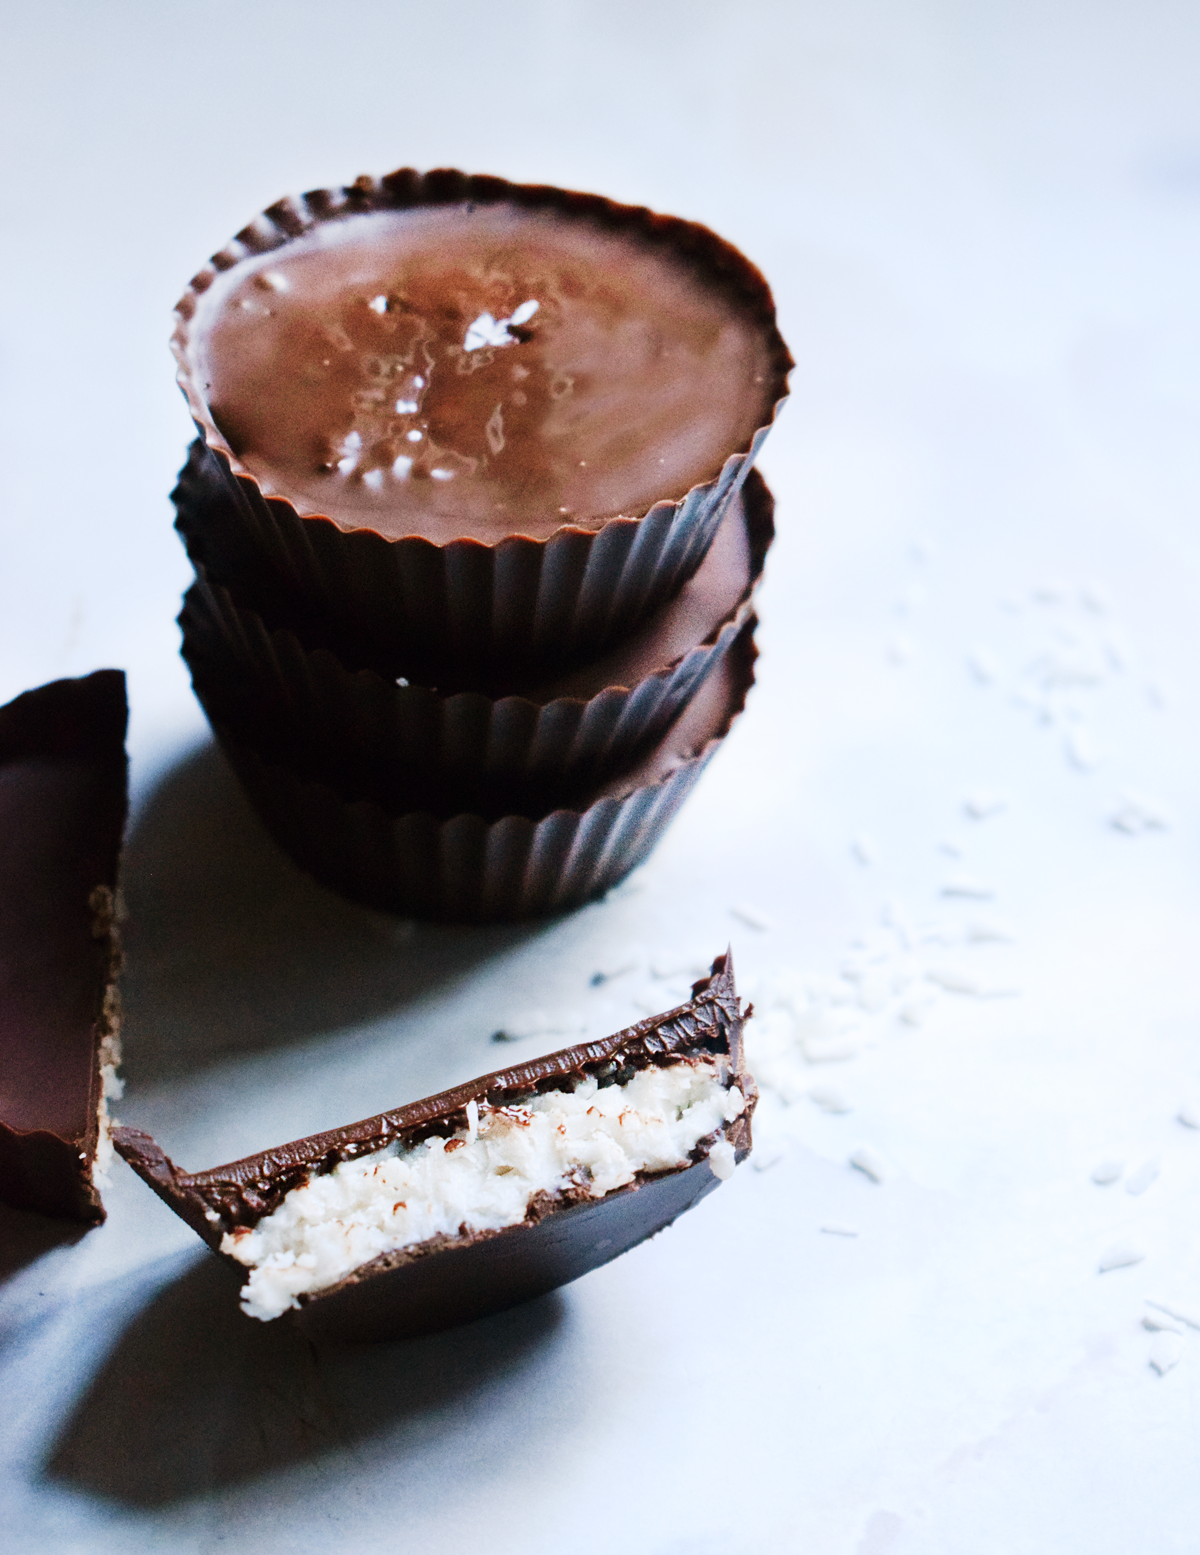 Chocolate Coconut Butter Cups - Eat Your Way Clean